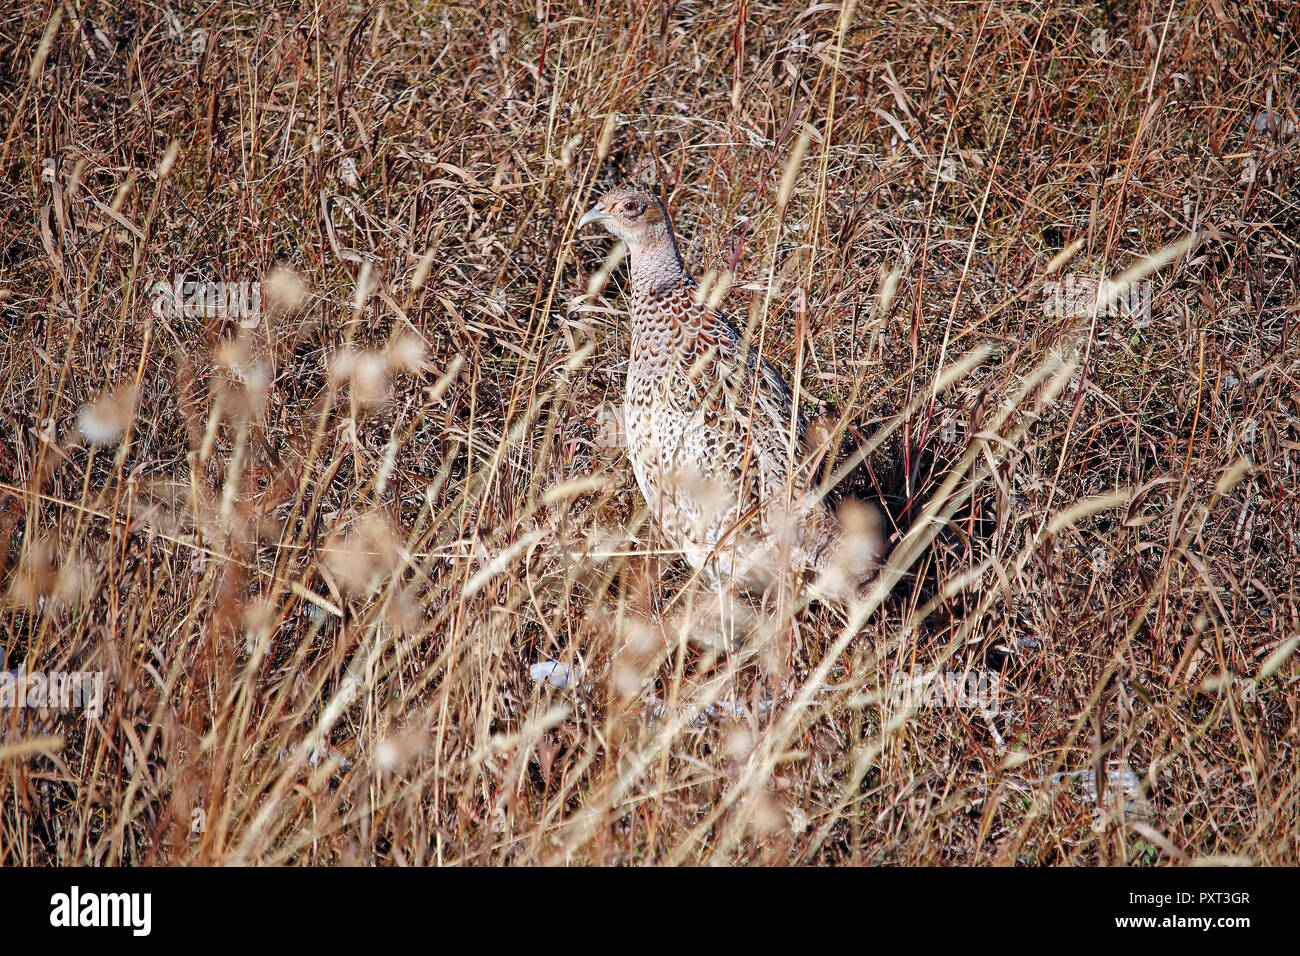 This Ring-neck pheasant hen was spotted on a hillside in early October, near McLeod Montana in the Absaroka Mountains. Stock Photo